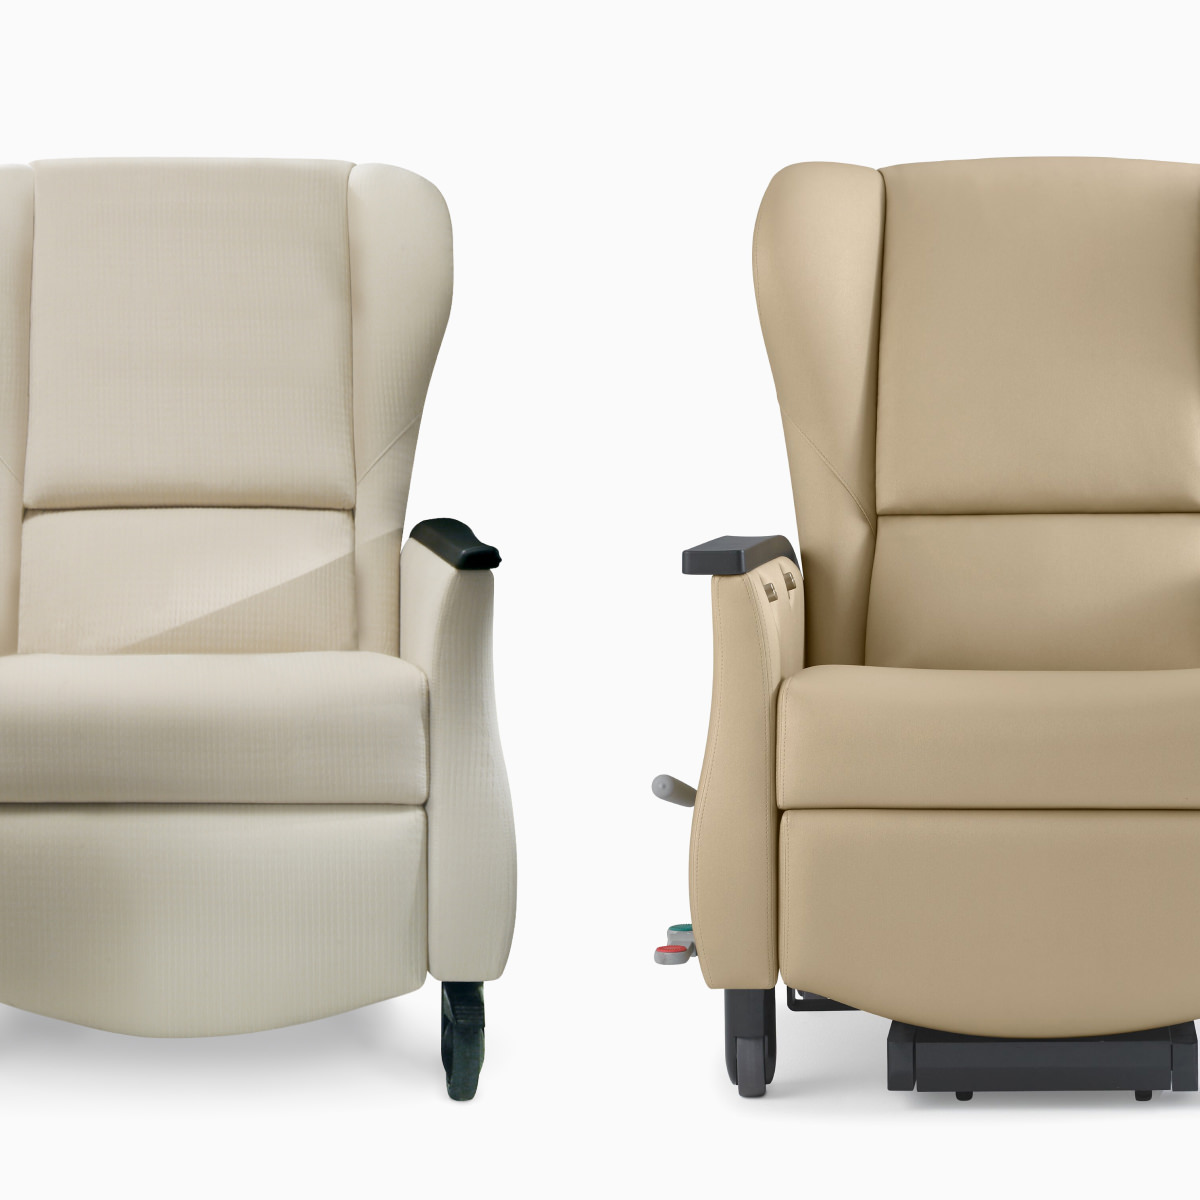 Two Nemschoff Serenity Recliners shown side-by-side to show the two available sizes.